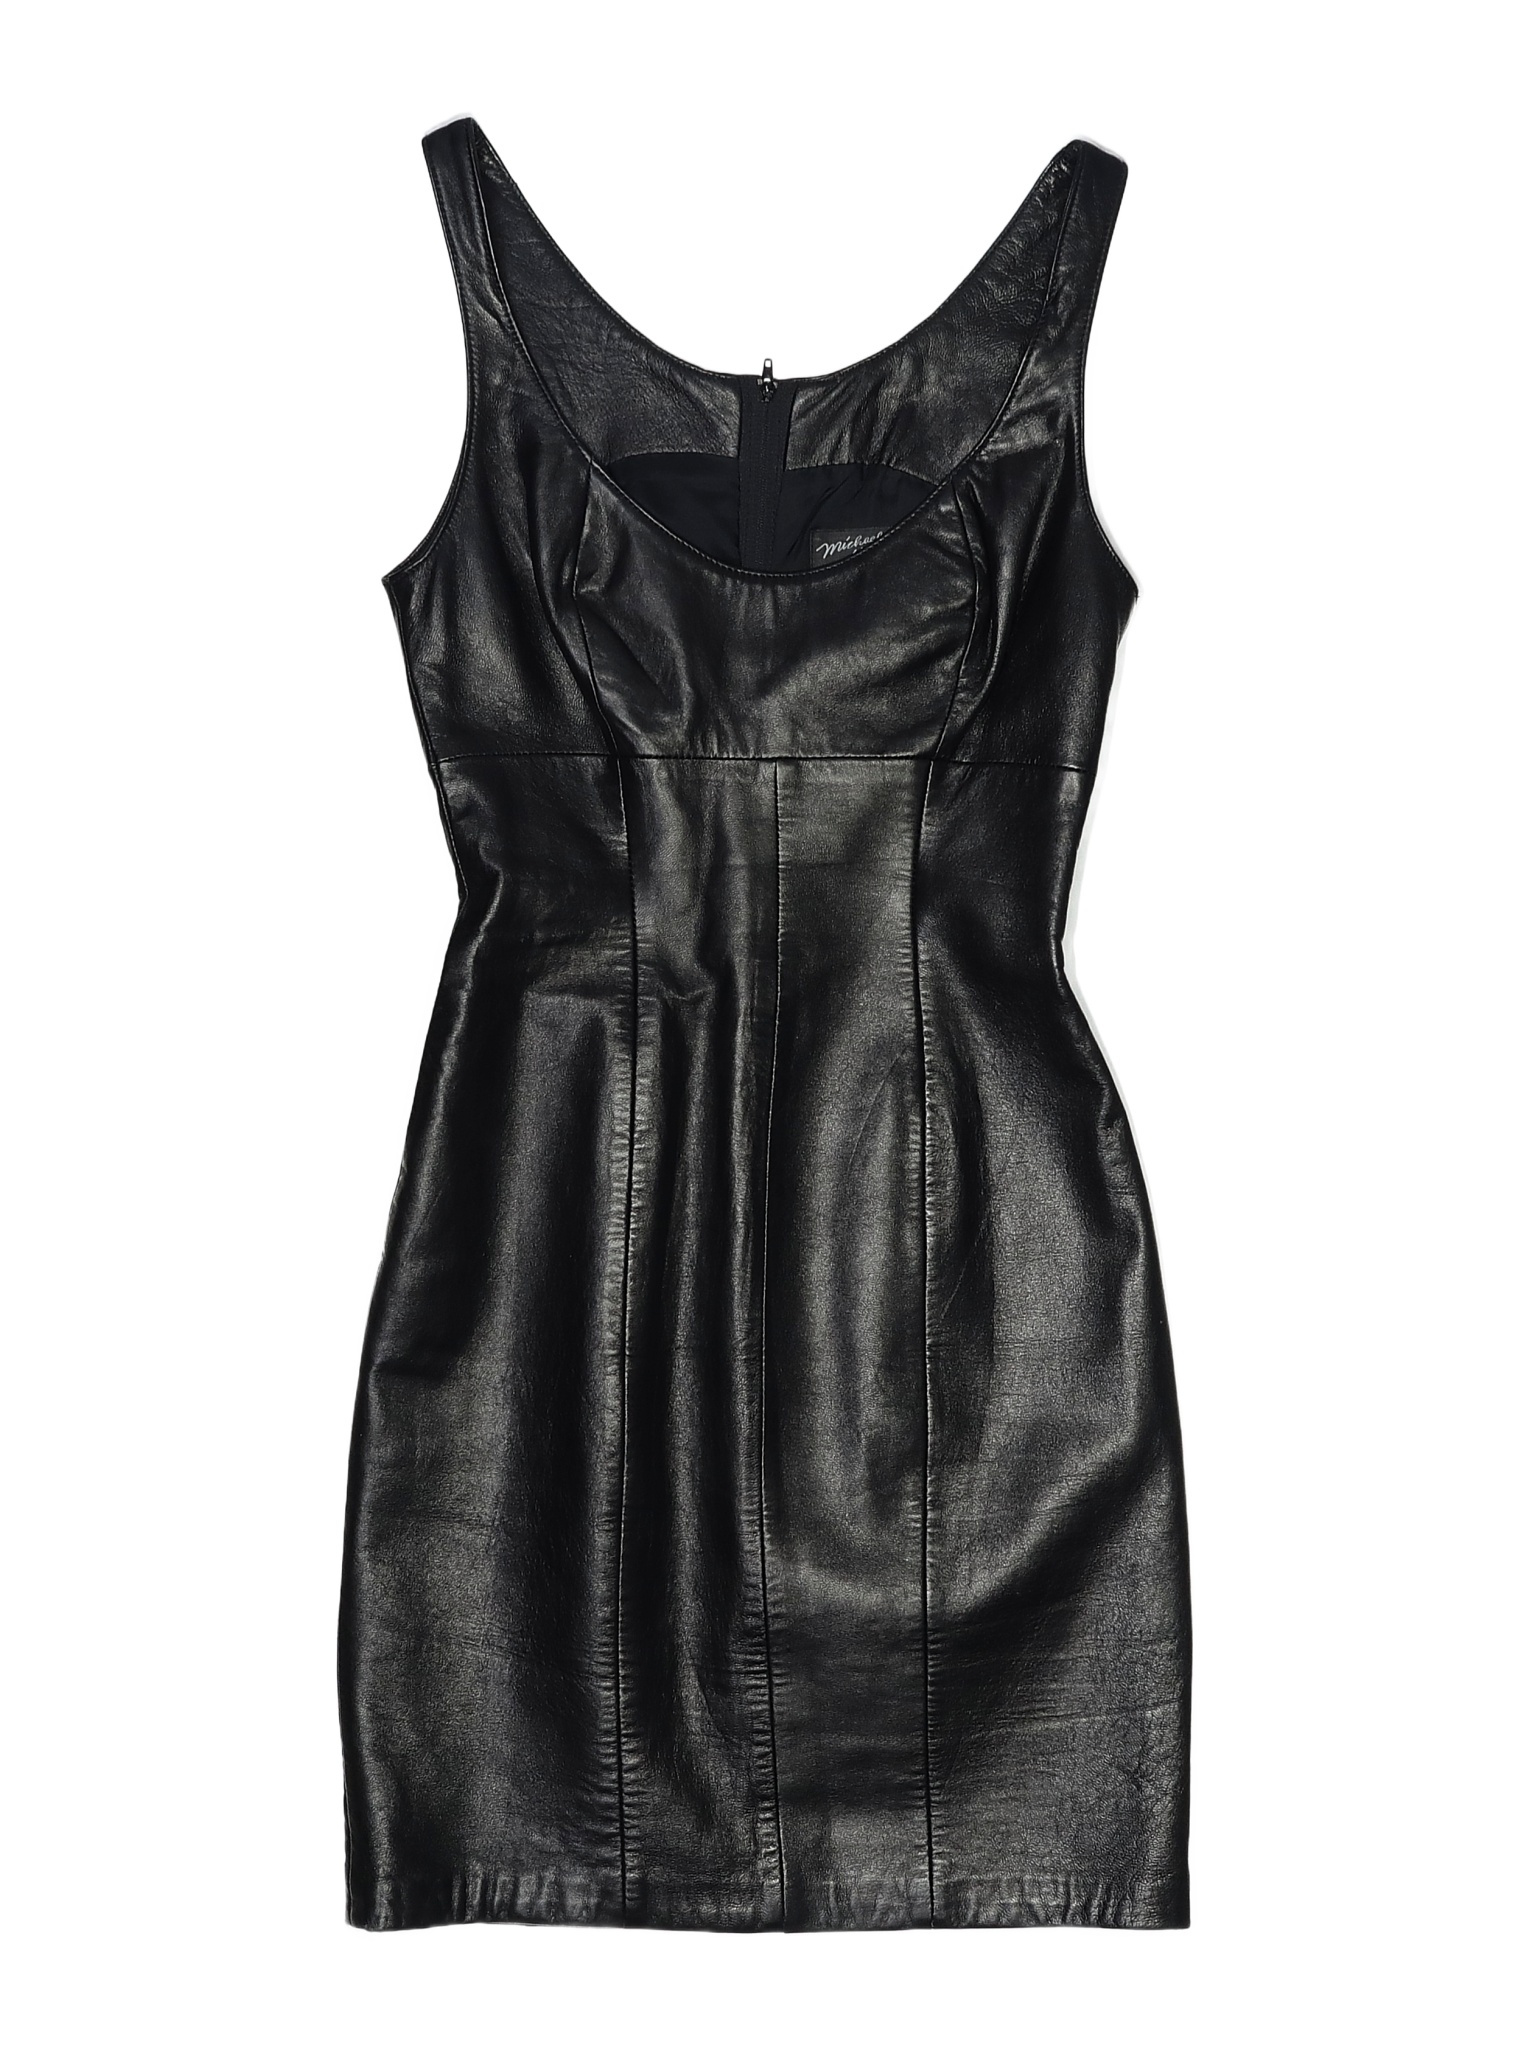 Michael Hoban for North Beach 100% Leather Black Cocktail Dress Size 2 ...